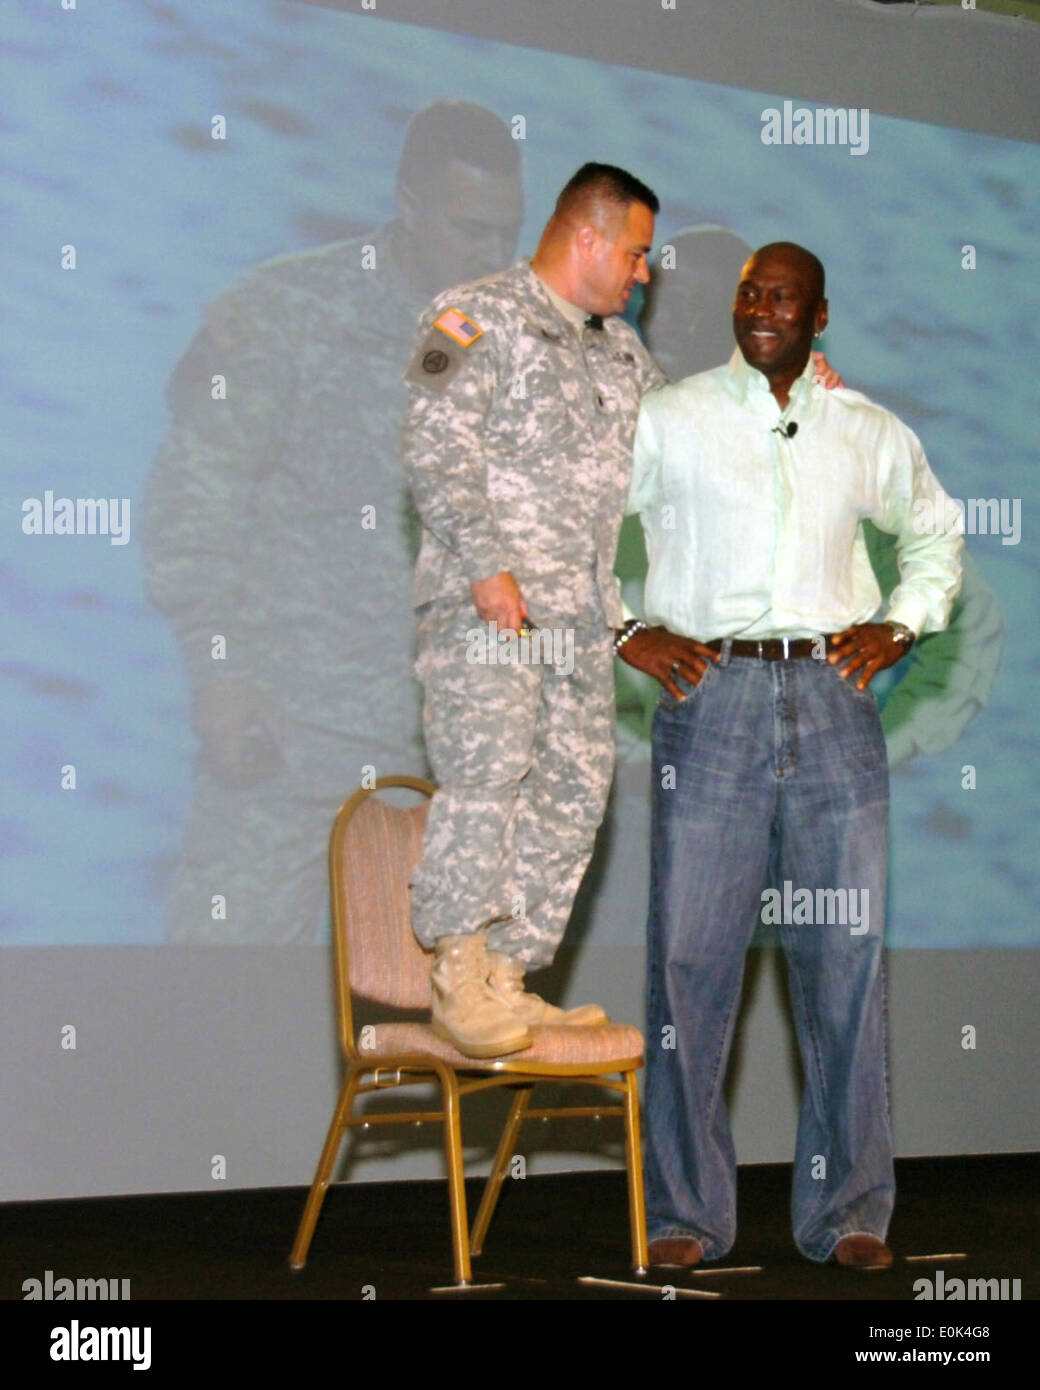 081009-A-3715G-147: A National Guard Citizen-Soldier compares himself to 6-foot-6 Michael Jordan in Orlando, Fla., as the NBA l Stock Photo